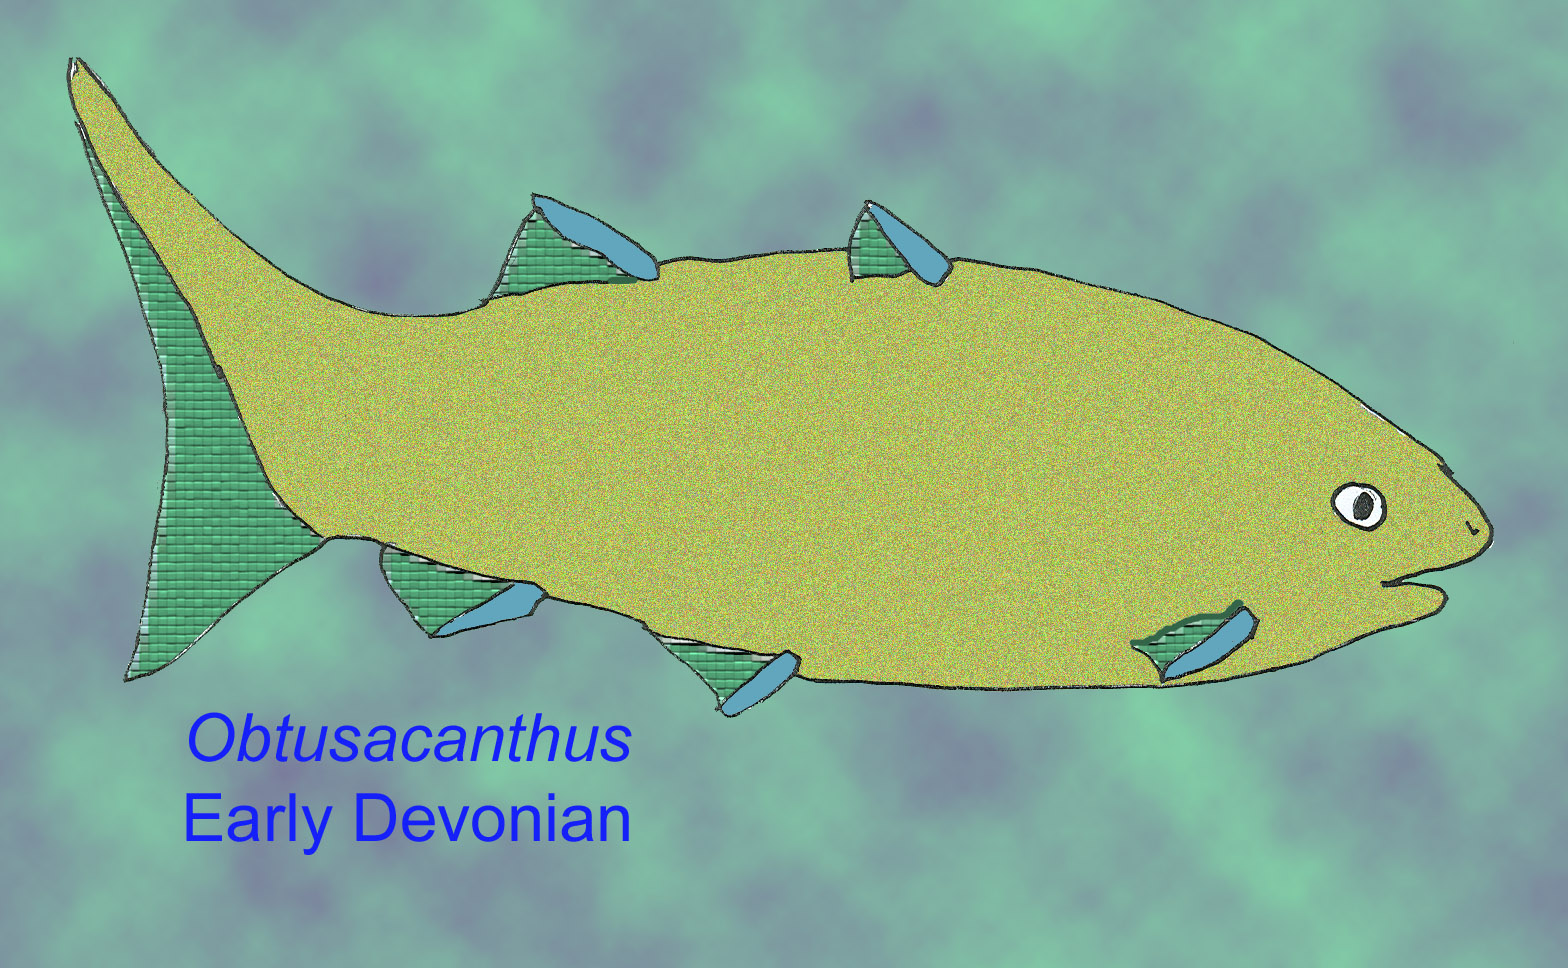 acanthodian from Early Devonian